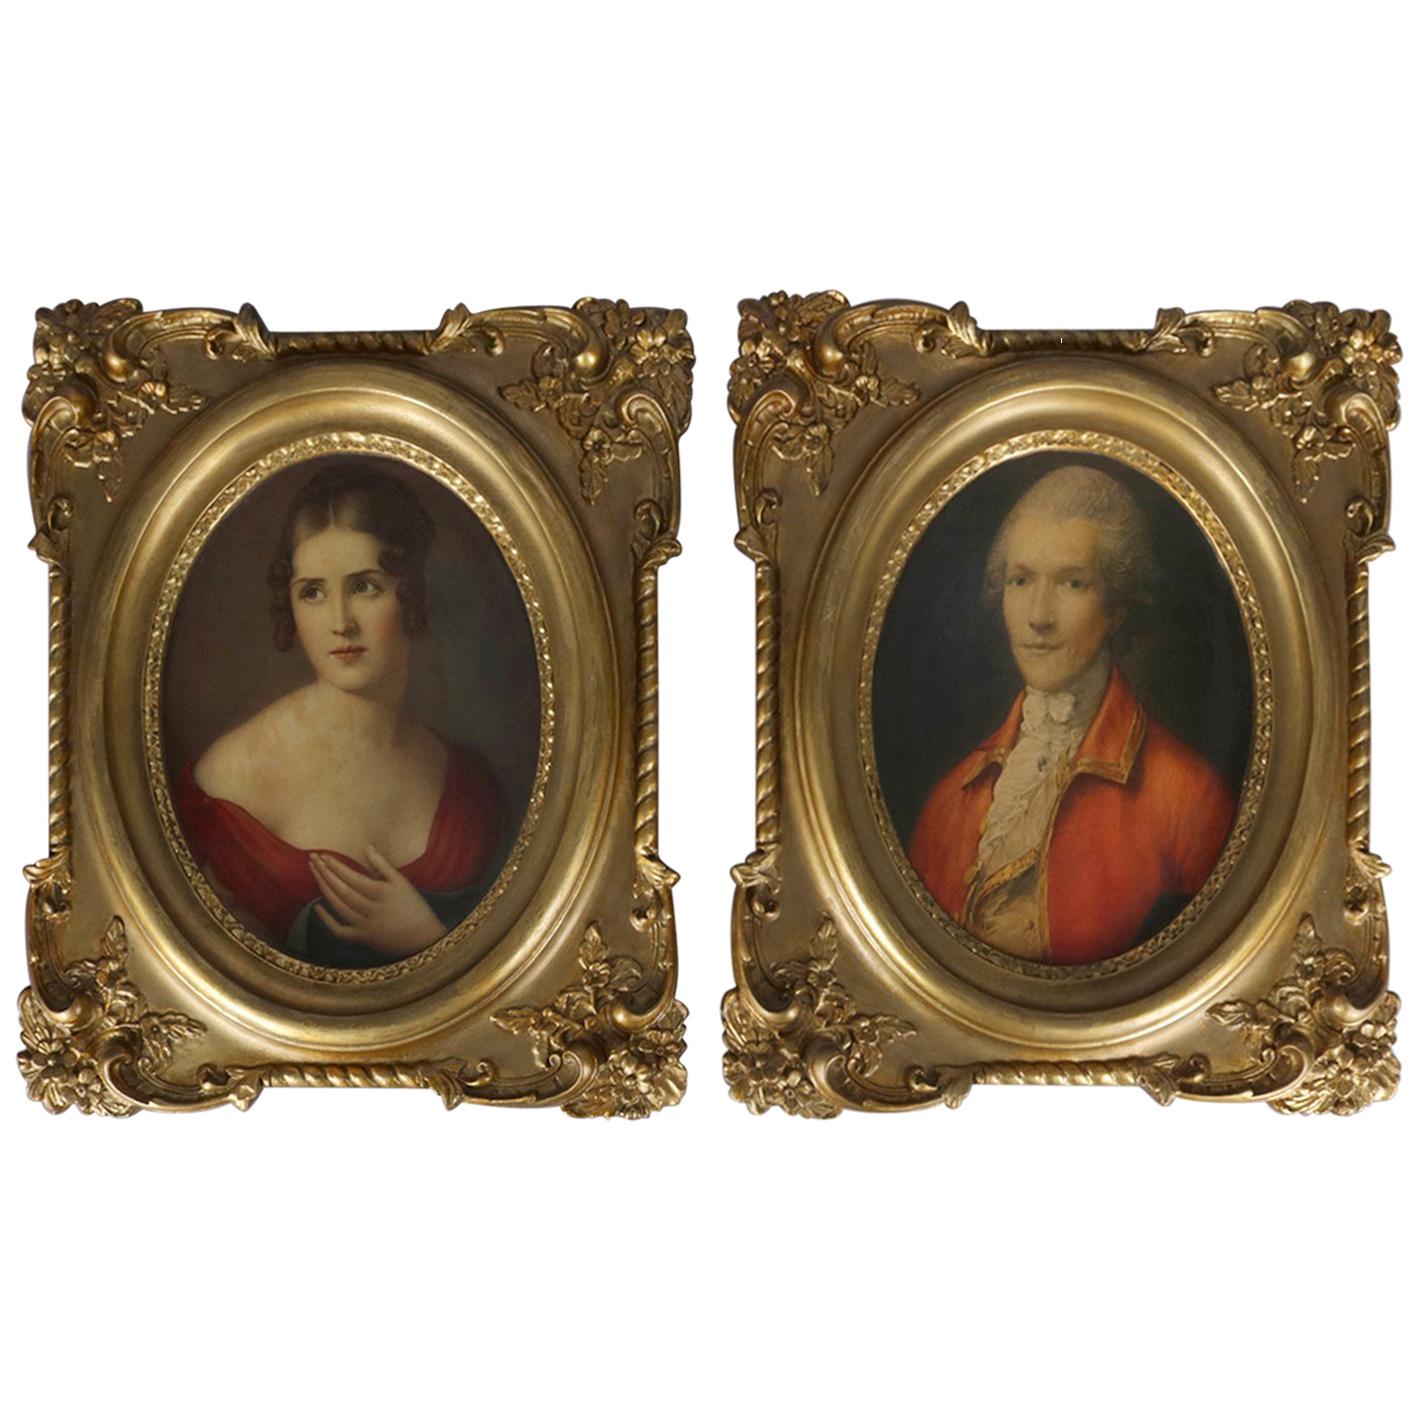 Pair of French Portrait Plaques with Lithographs of Baron & Baroness